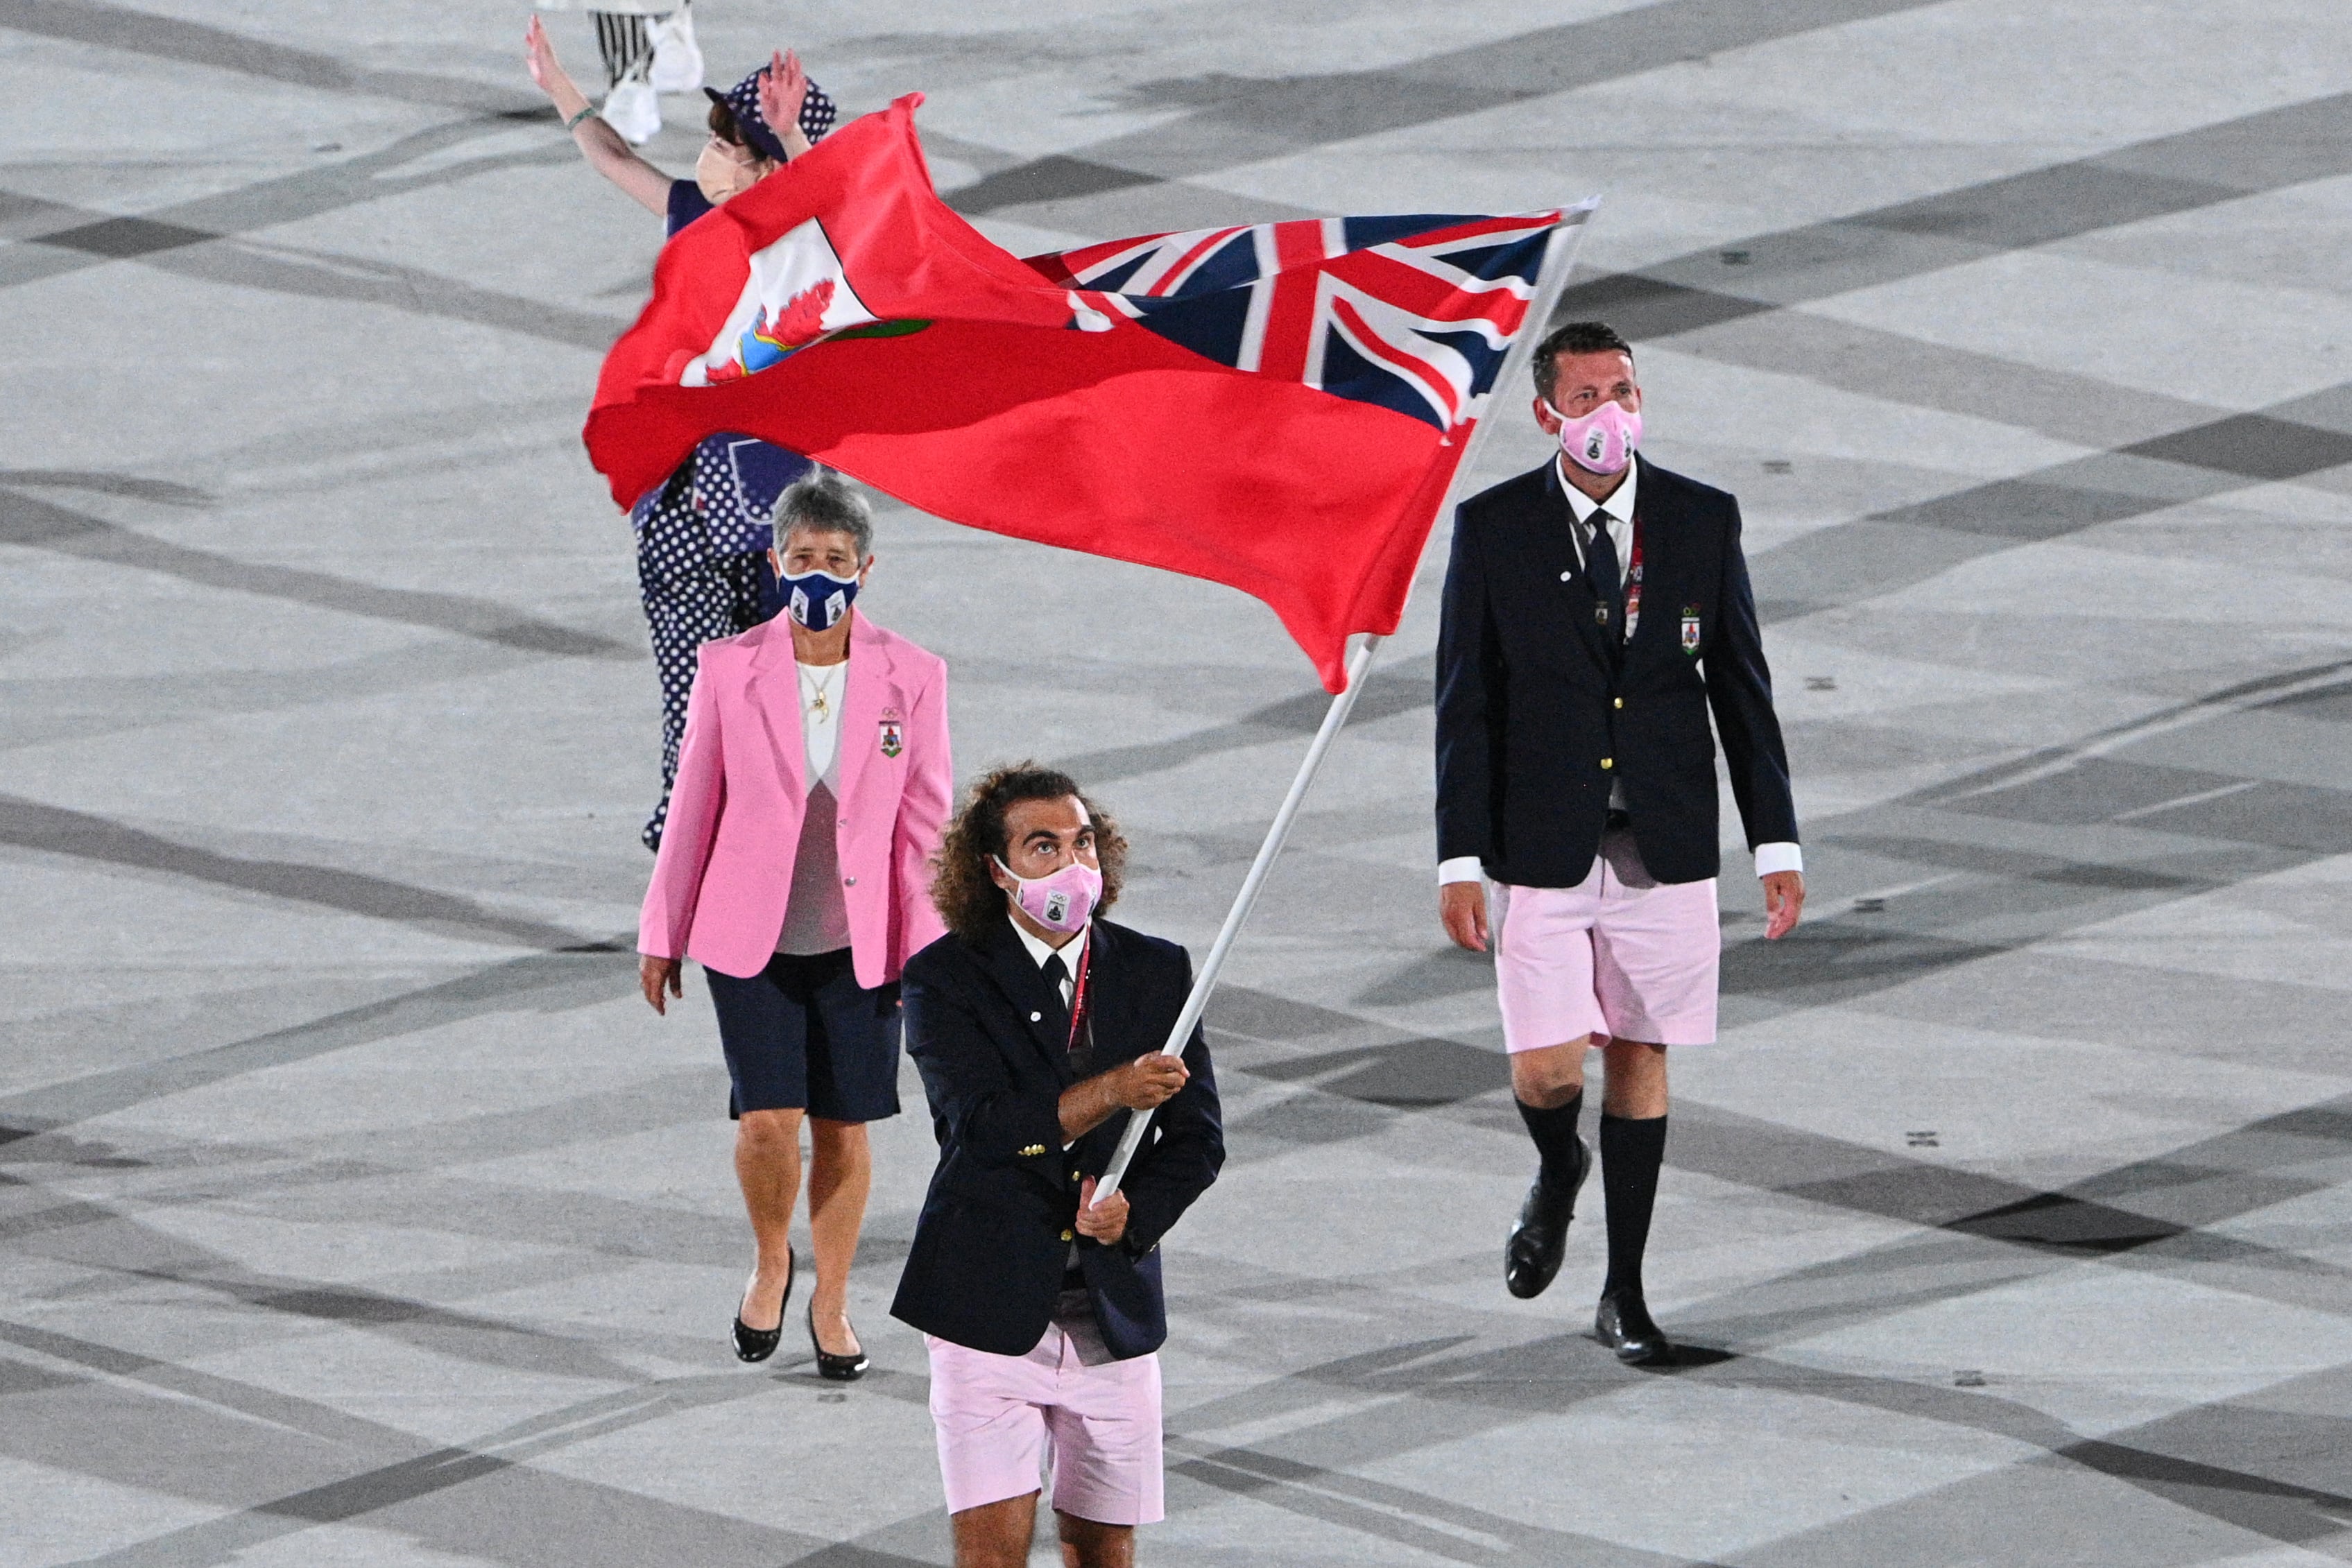 Tokyo Olympics Opening Ceremony Fashion: 11 Standout Moments to